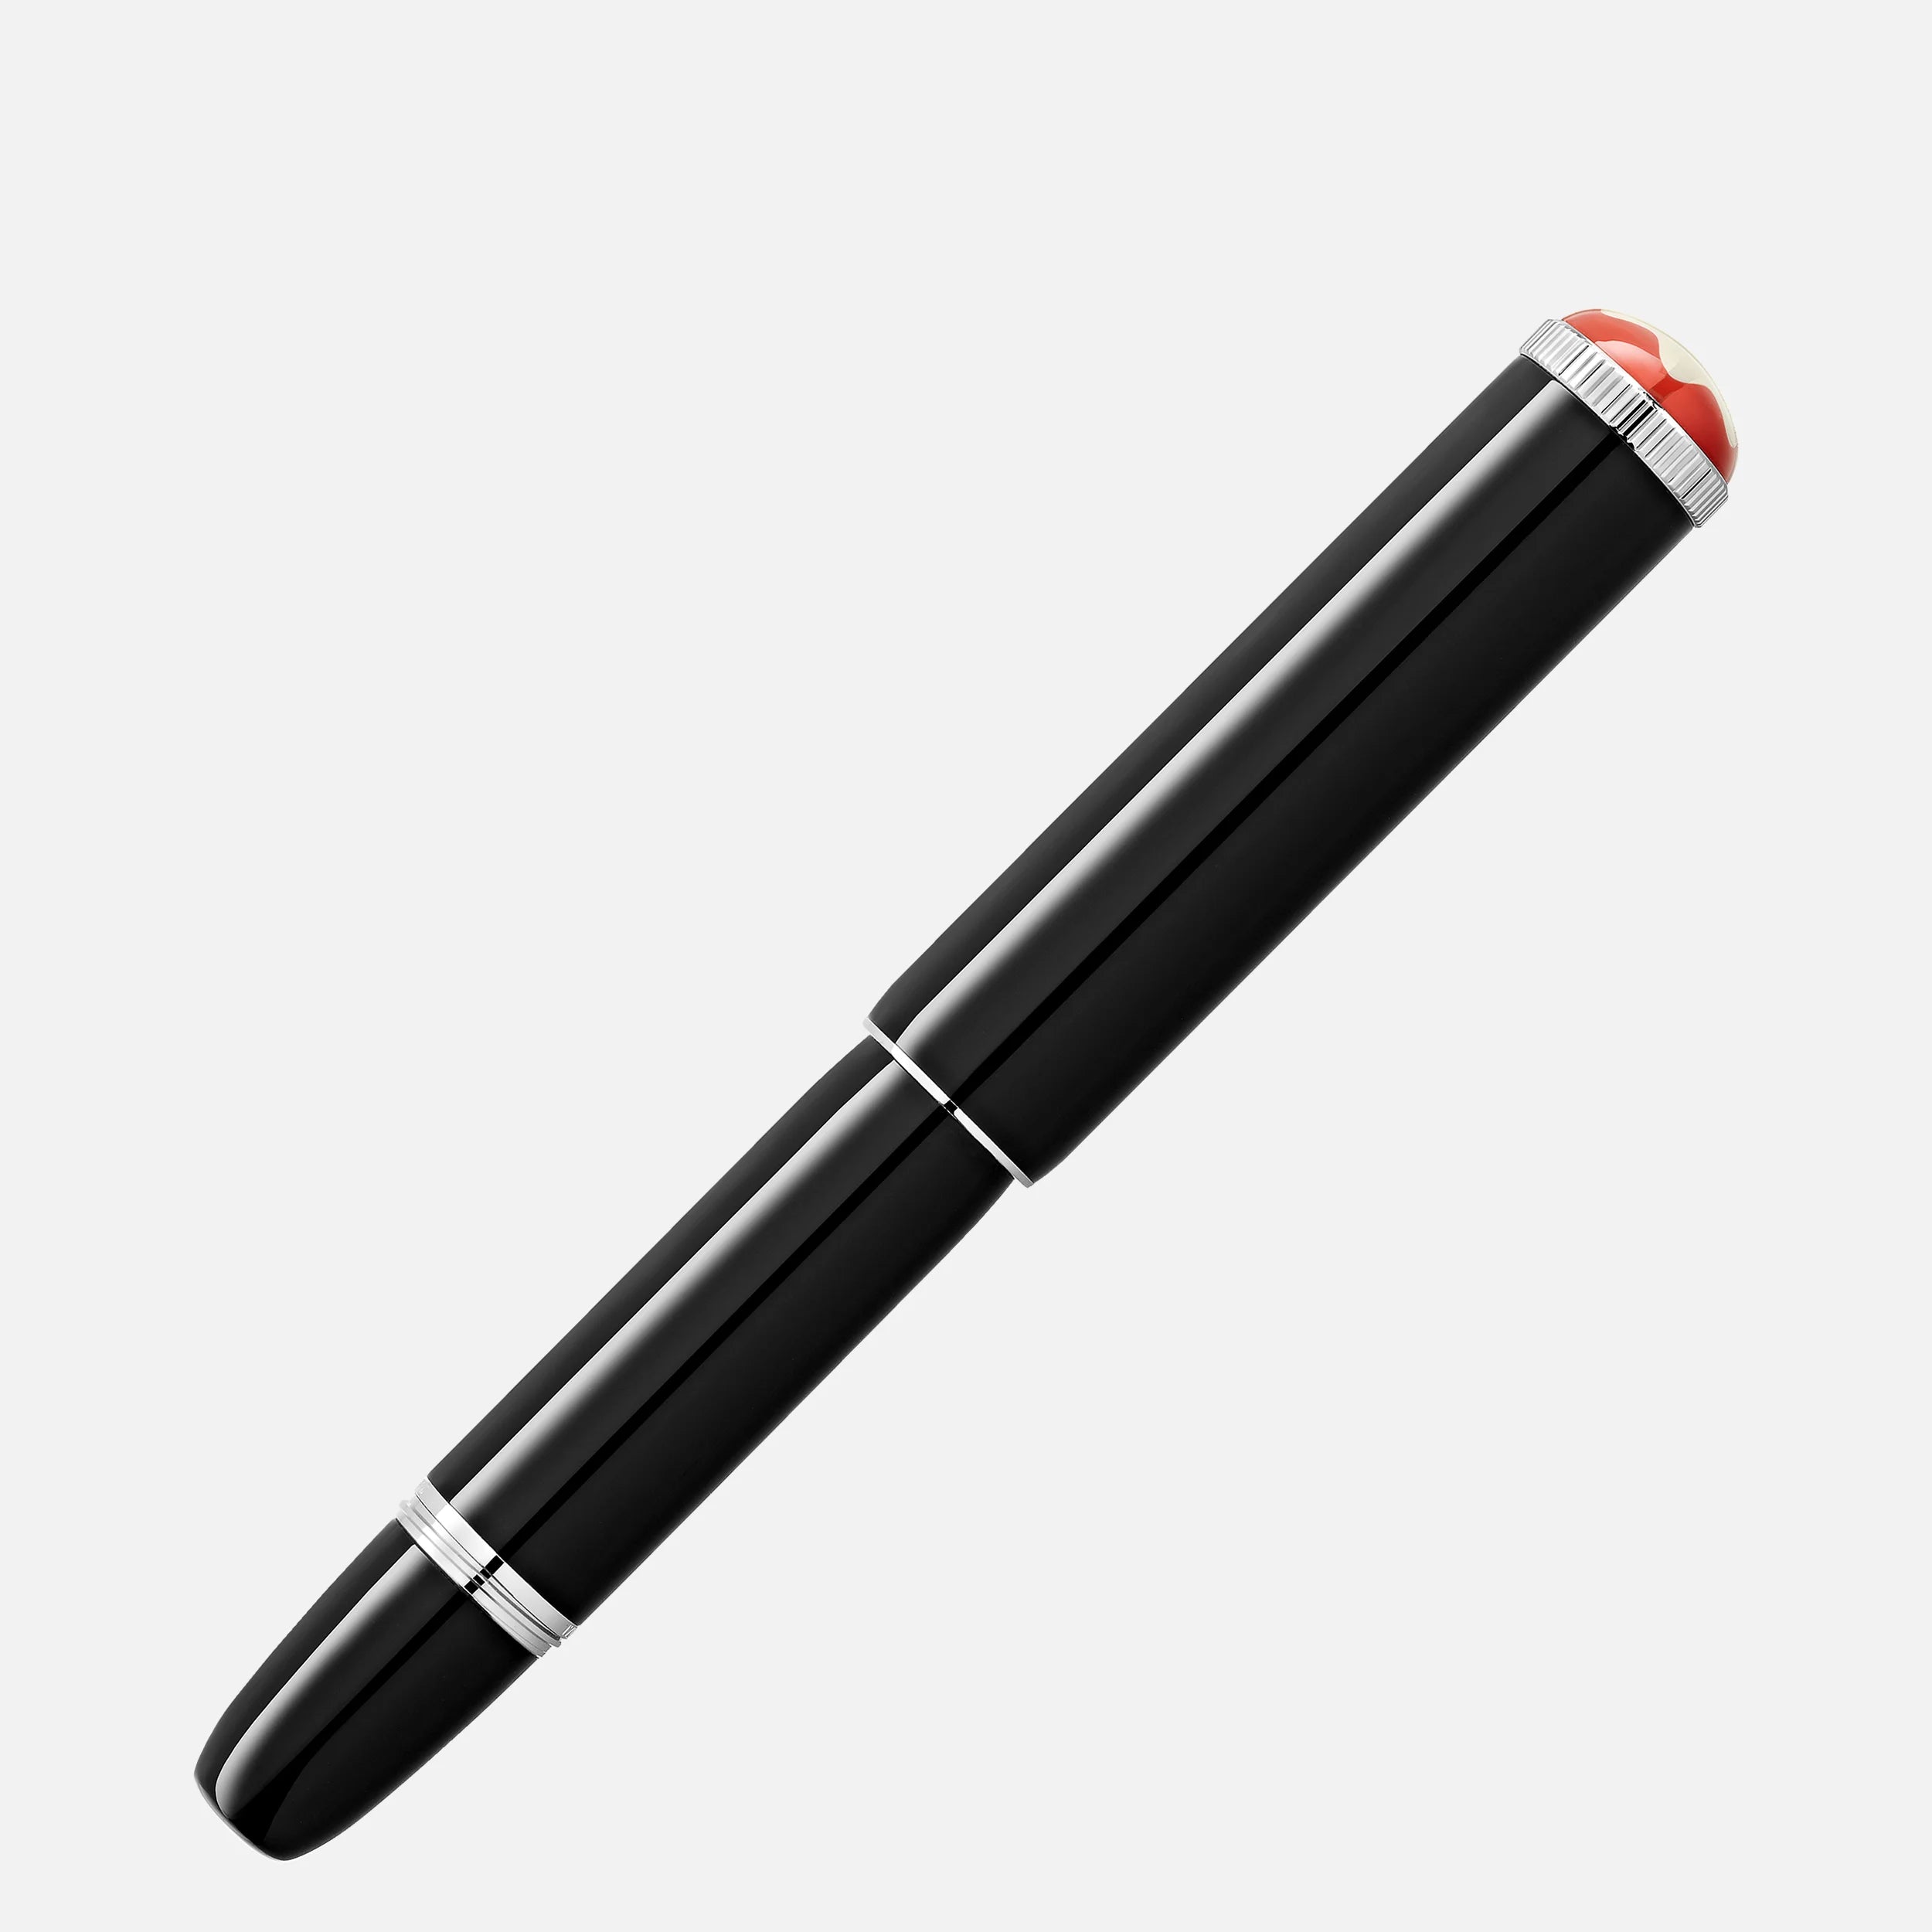 MONTBLANC | Roller Montblanc Heritage Rouge et Noir “Baby” Edizione Speciale Nera | MB127852